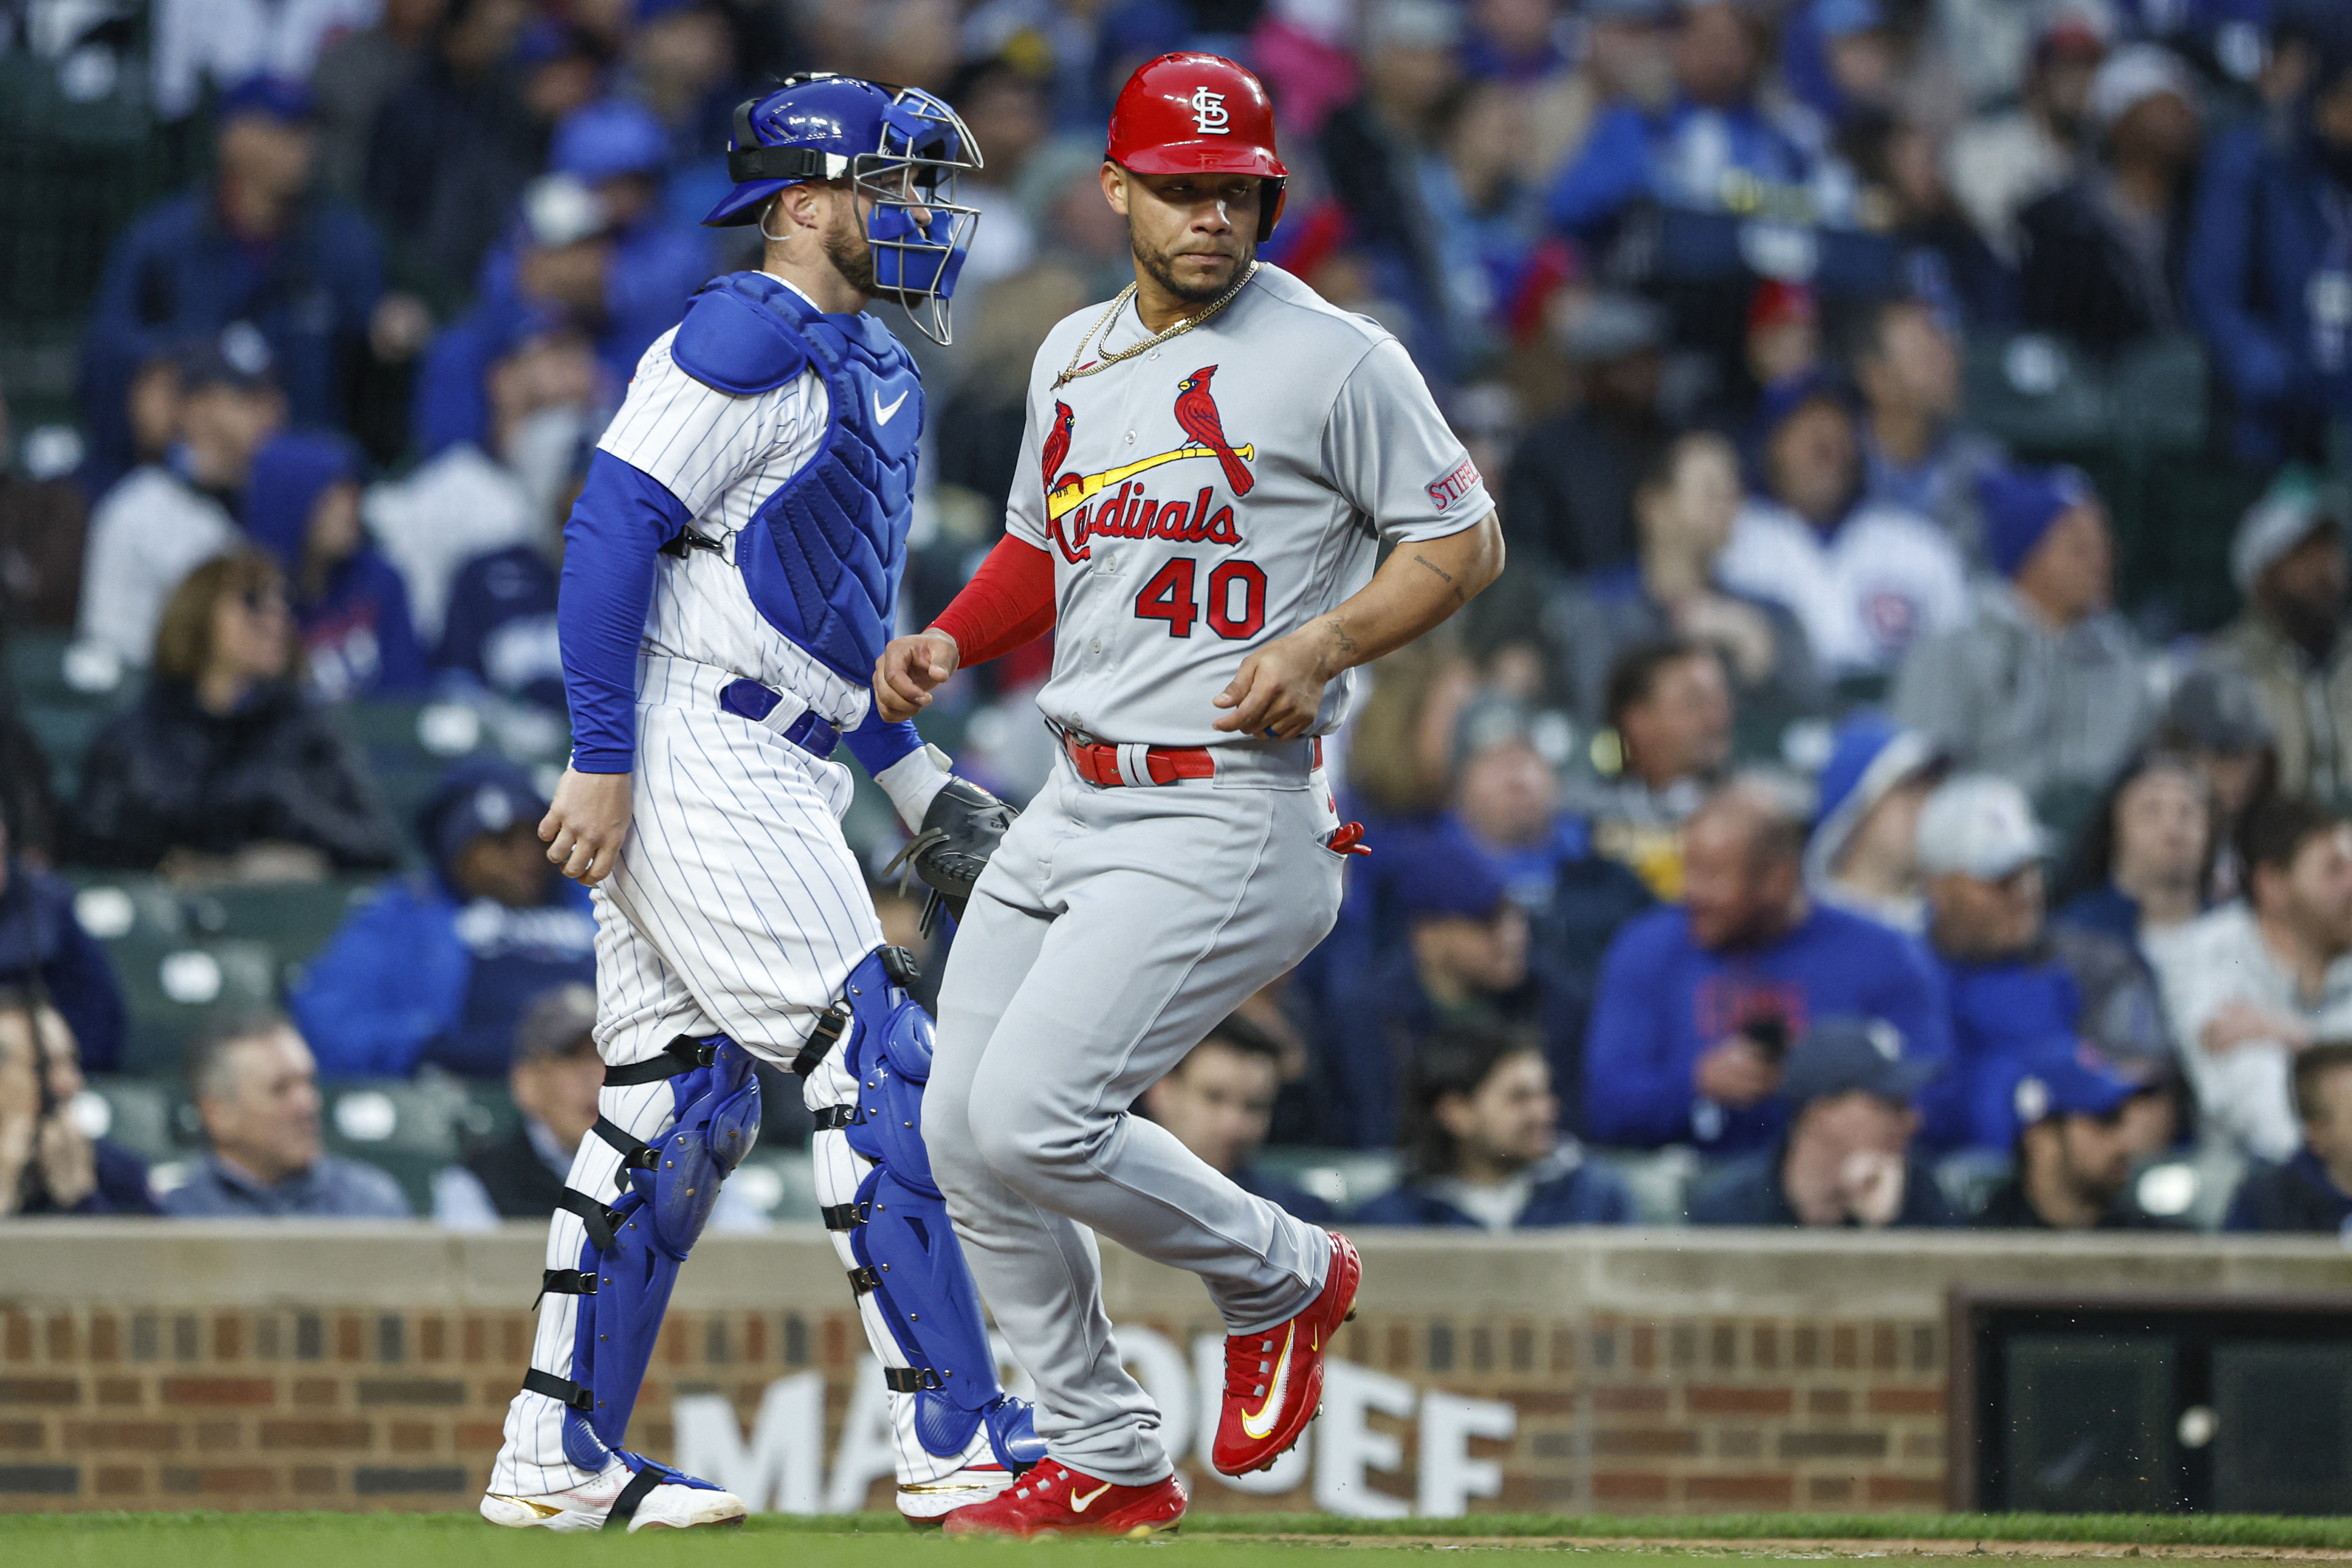 Contreras steps up in return to Wrigley to lead Cardinals over Cubs, 3-1  Midwest News - Bally Sports